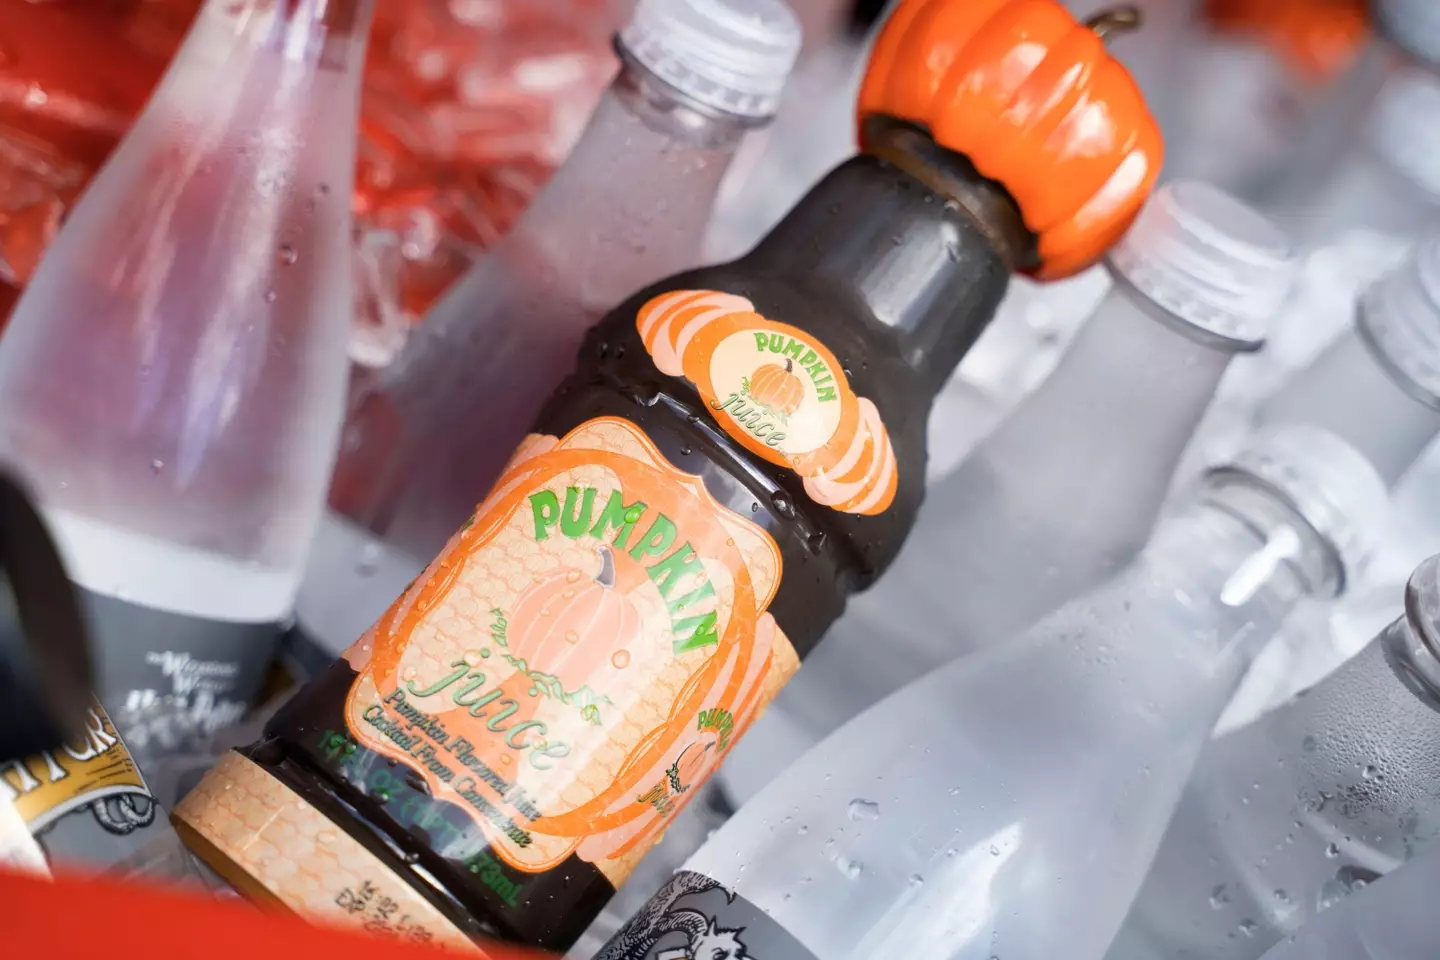 If only we could pick up some Pumpkin Juice from our local Tesco.